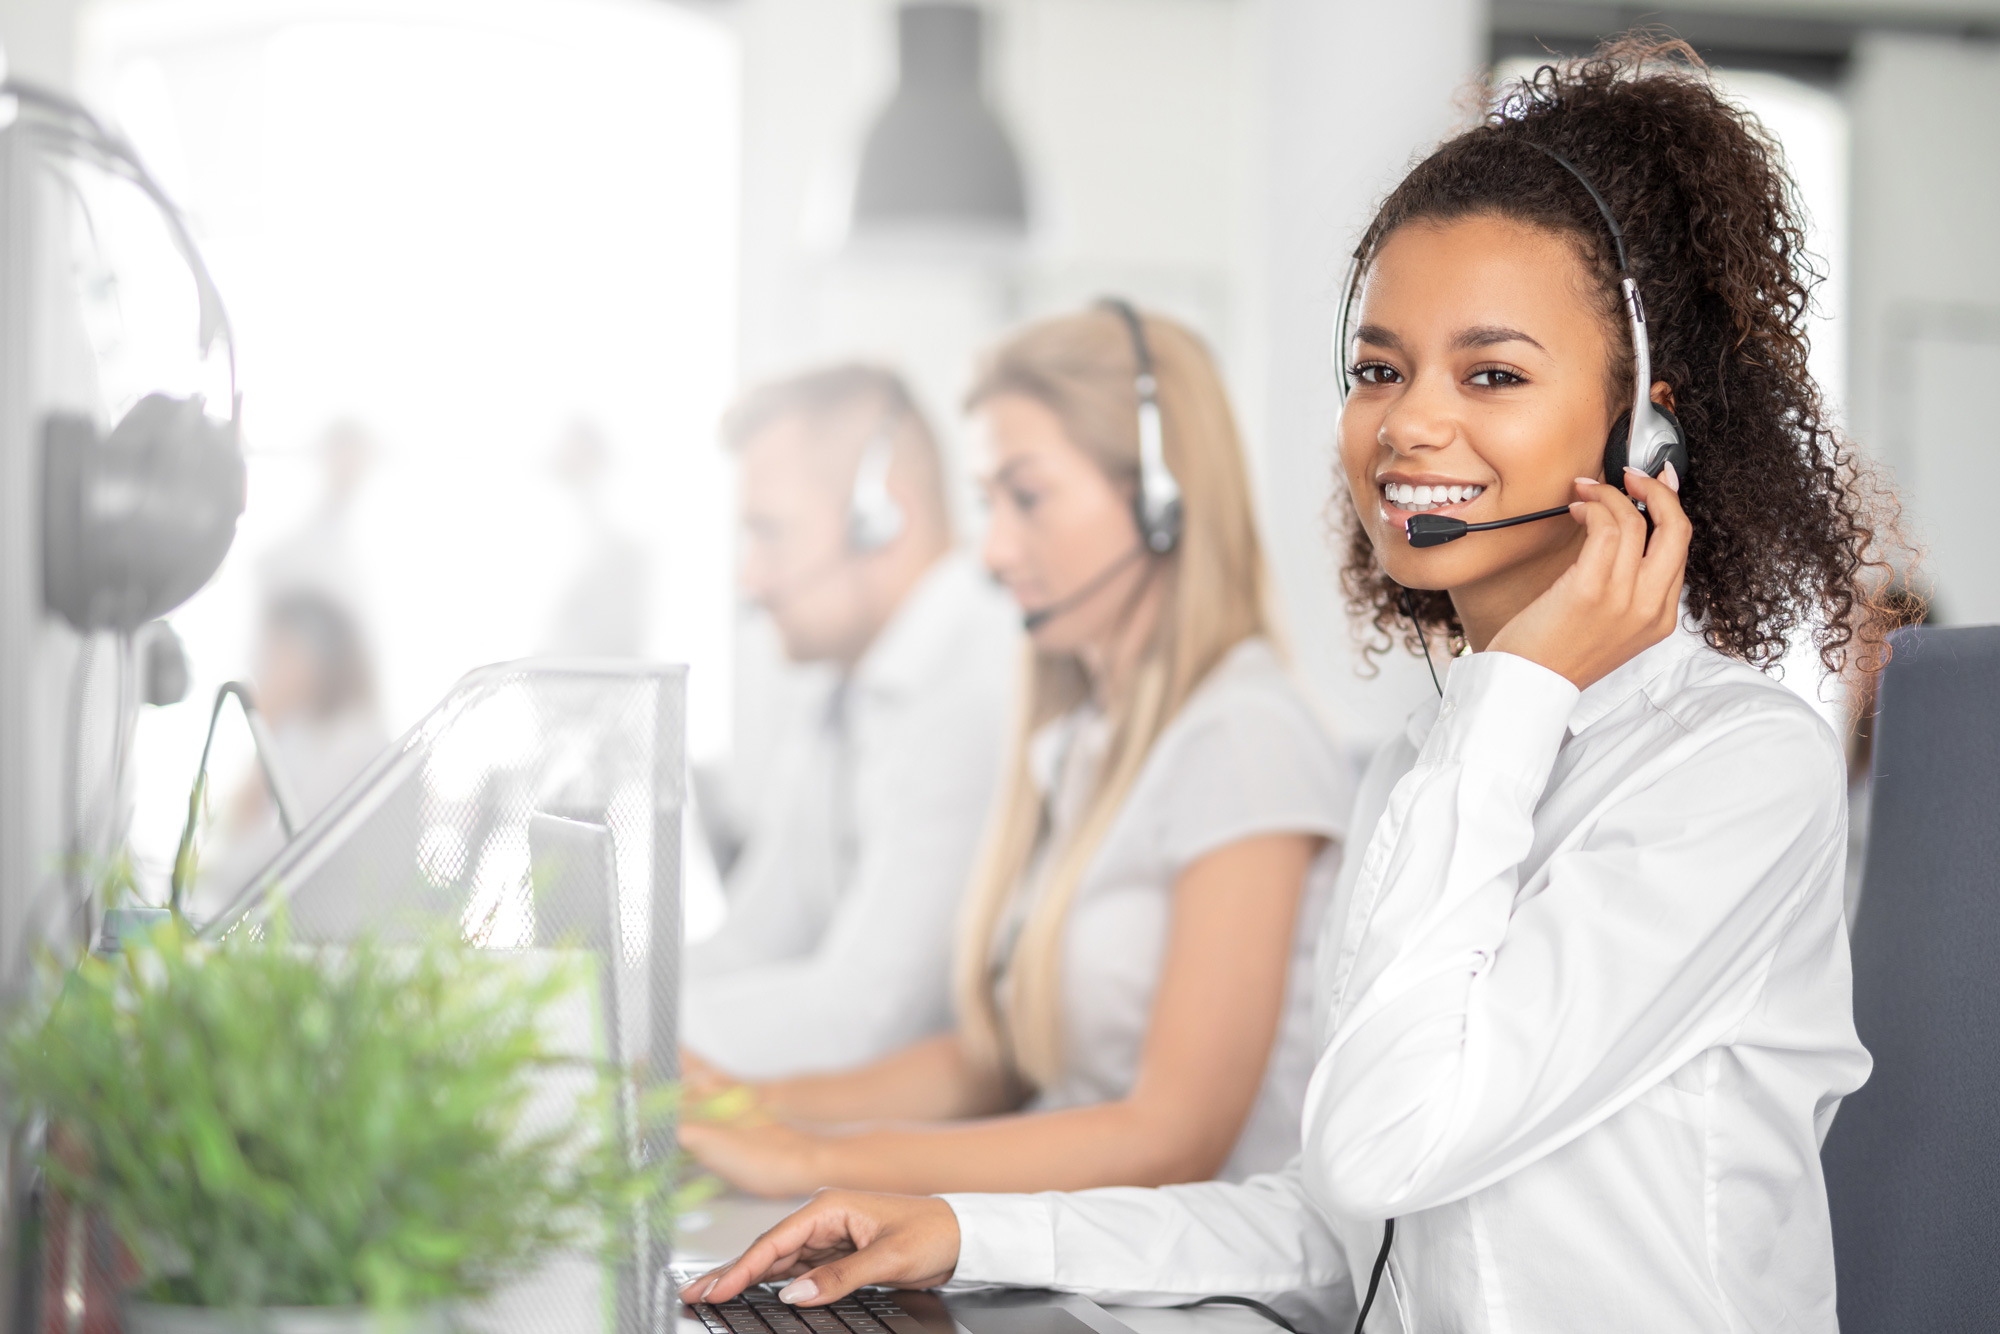 A customer service representative in a headset sits at in front of aa keyboard. She is looking into the camera and smiling.